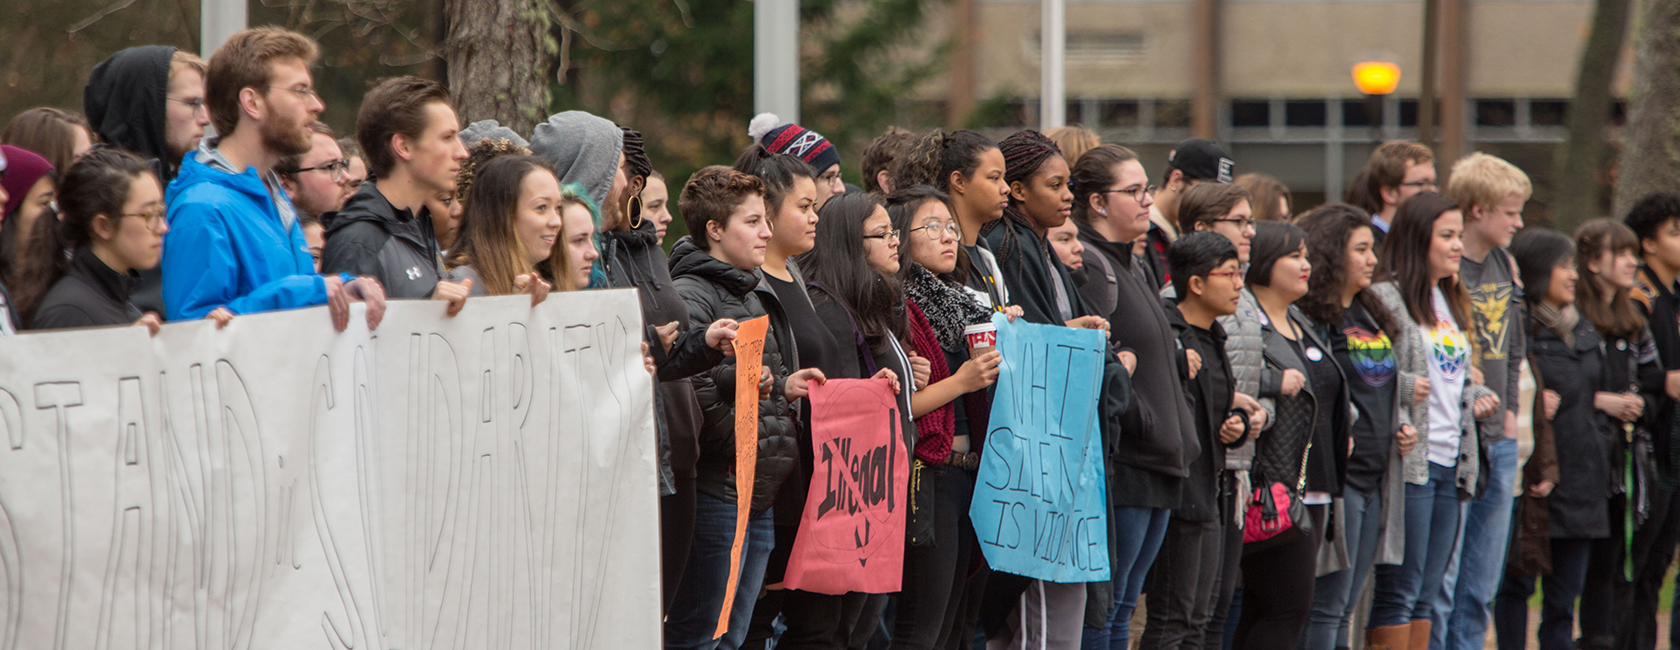 PLU students stand in solidarity